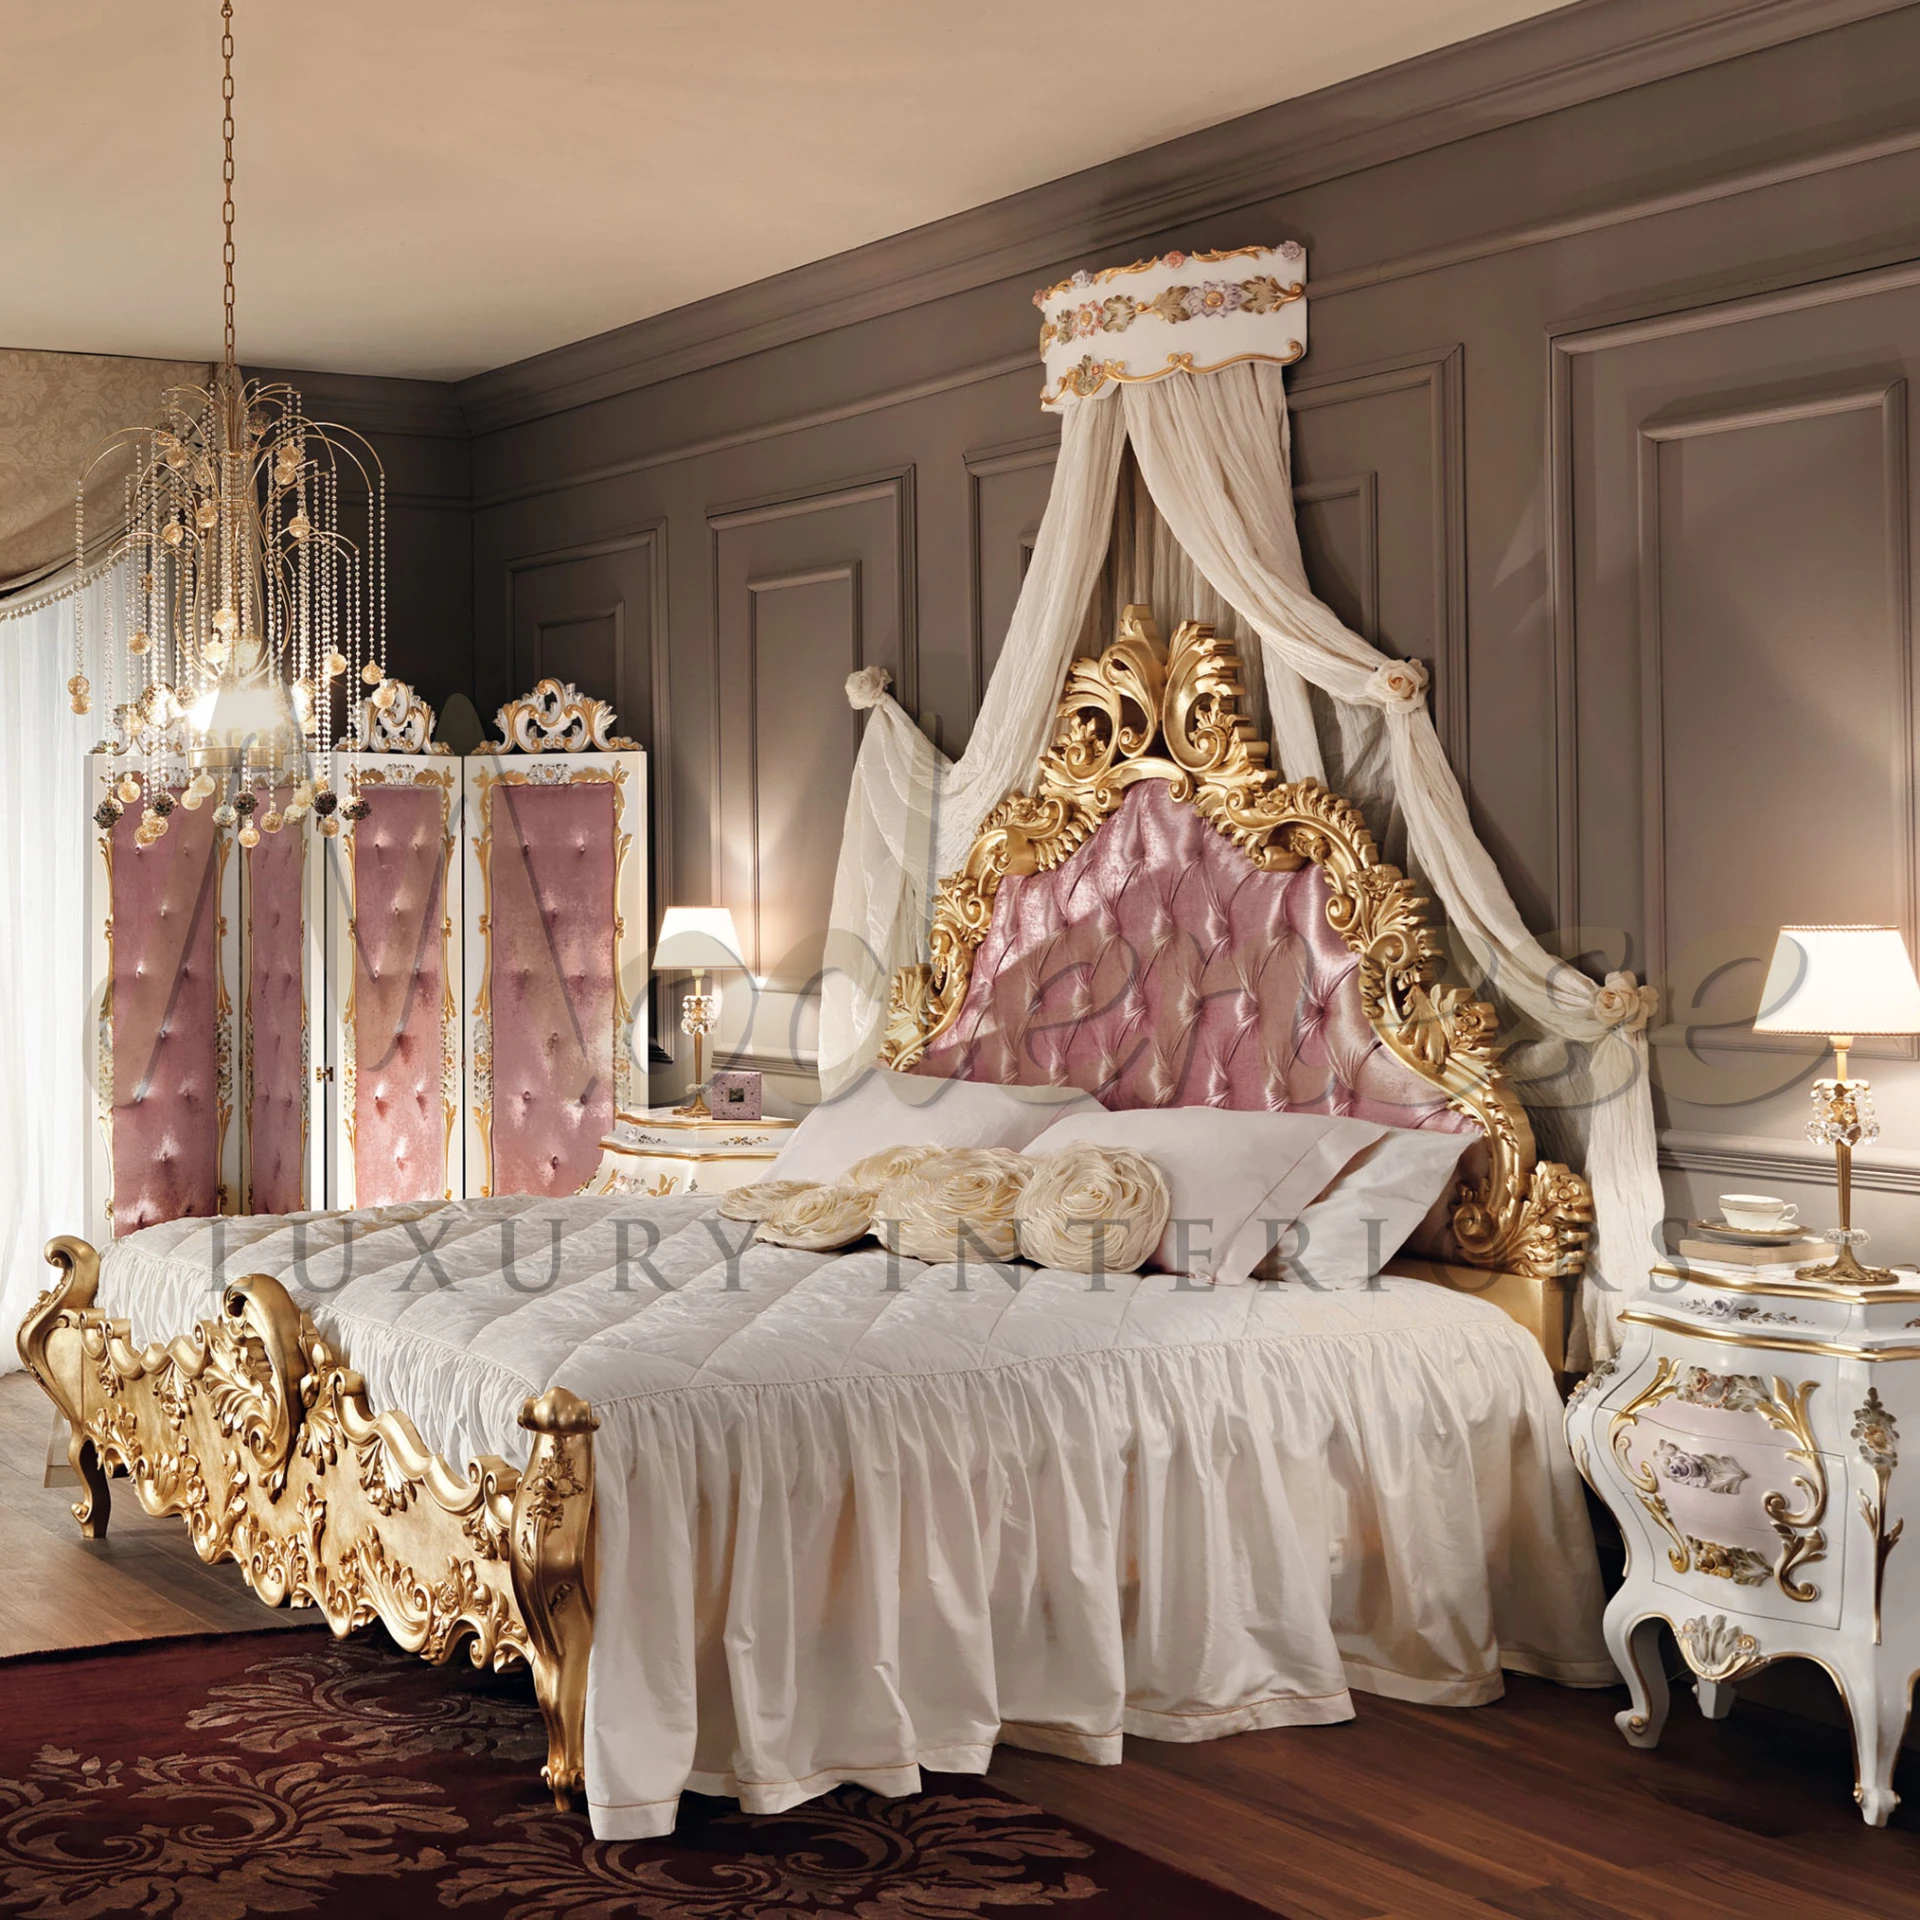 Elegant four-poster bed with a pink and gold headboard, ornate golden decorations, and sheer canopy in a classic bedroom created Modenese Furniture Manufacturer.